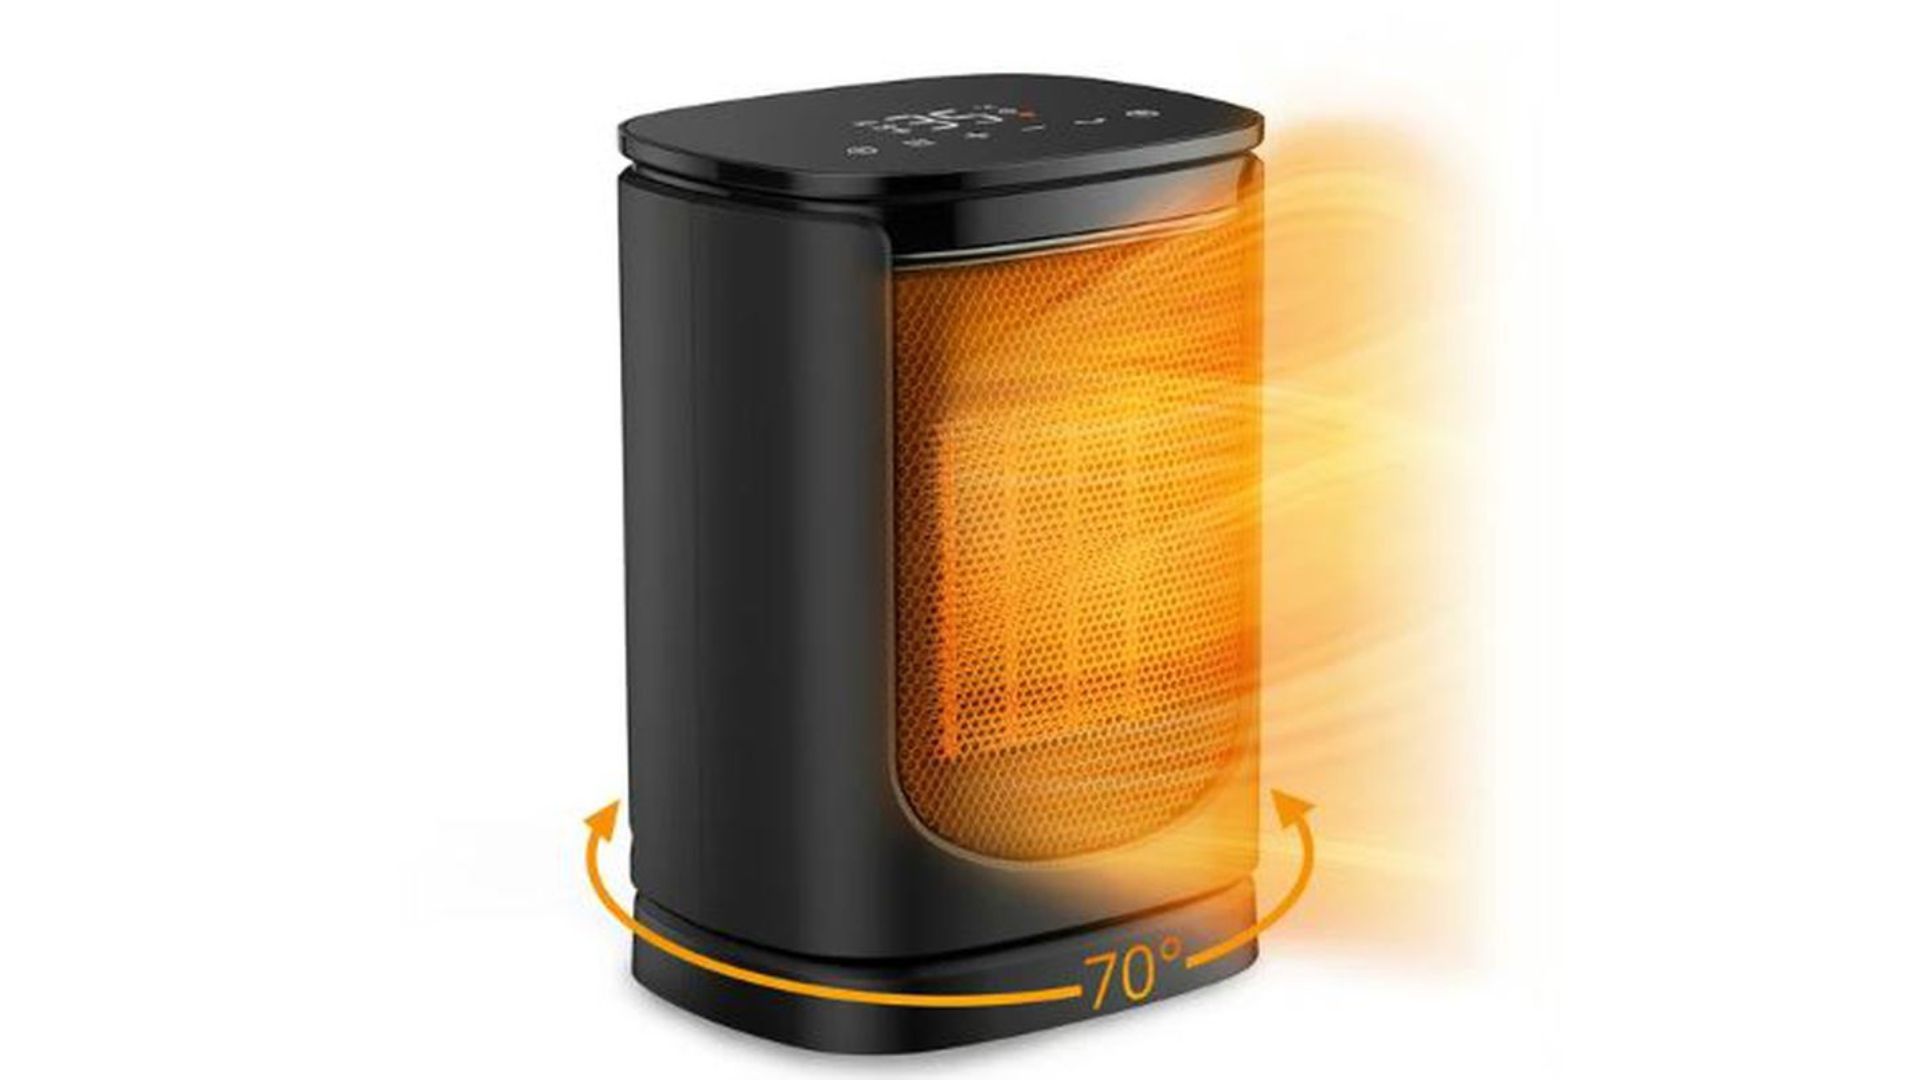 Space heater safety: the safest space heaters for 2022